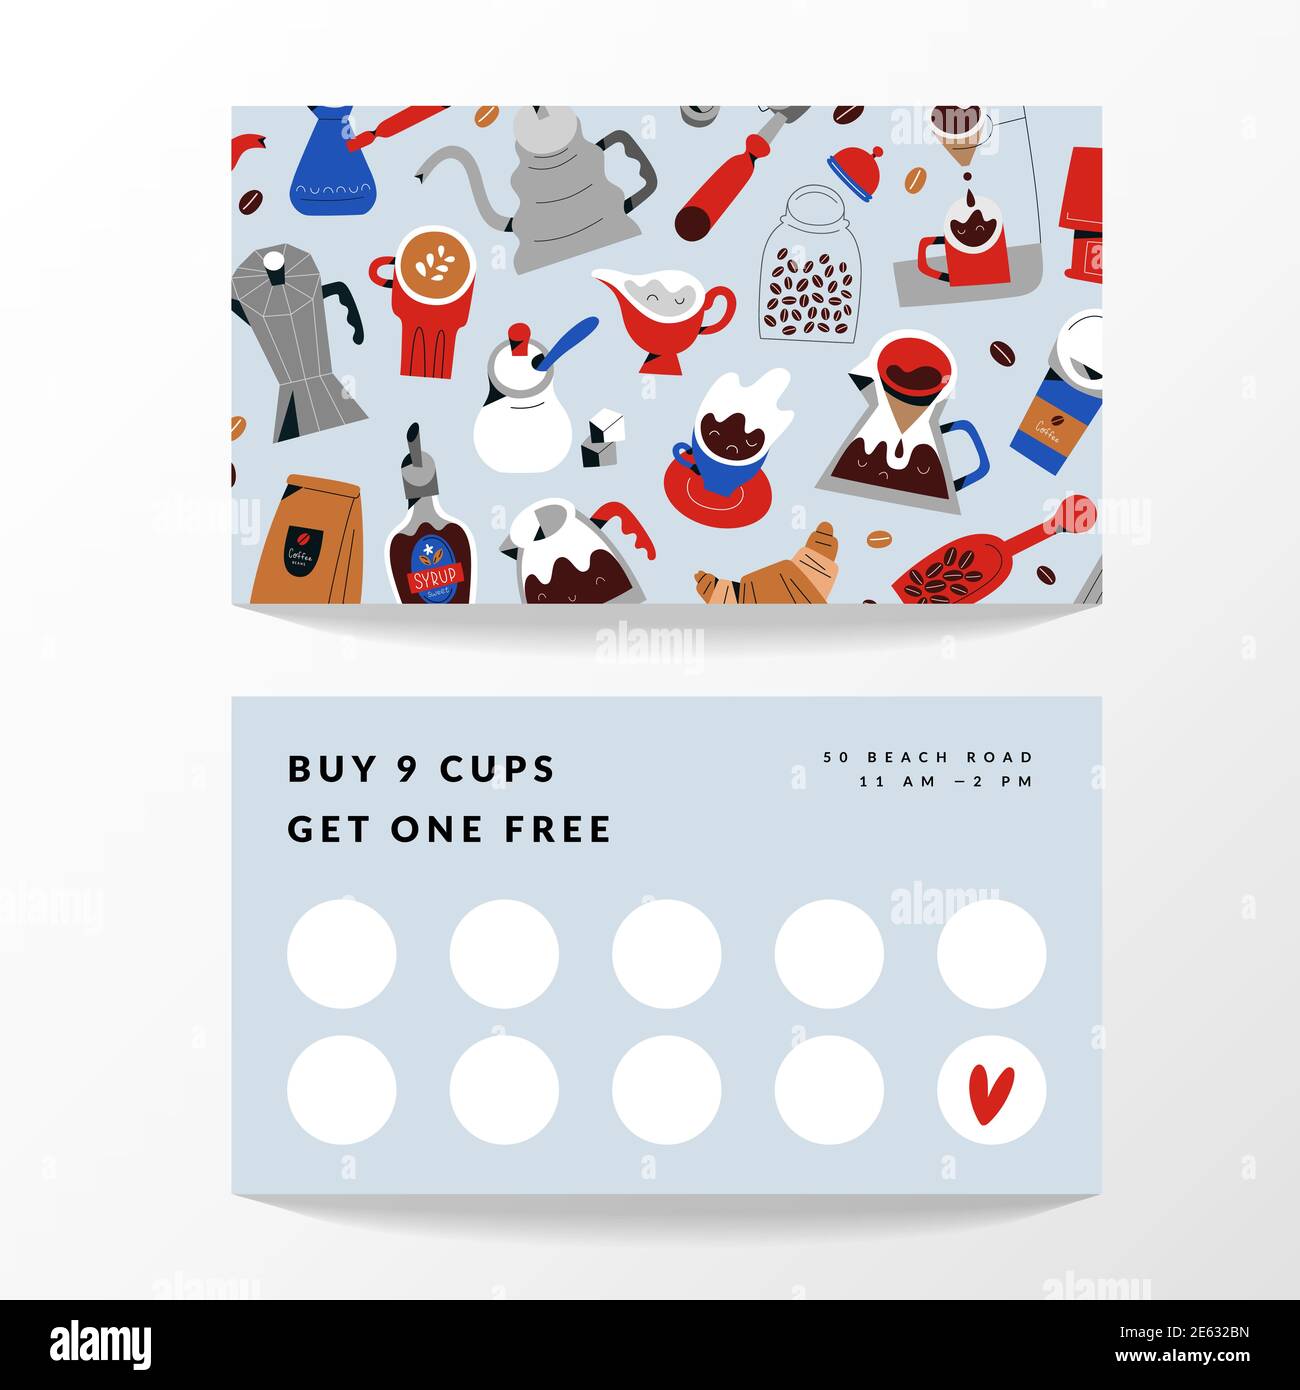 Coffee card template, vector layout for loyalty program. Minimalist design with modern illustrations of coffee cups and mugs. Stock Vector